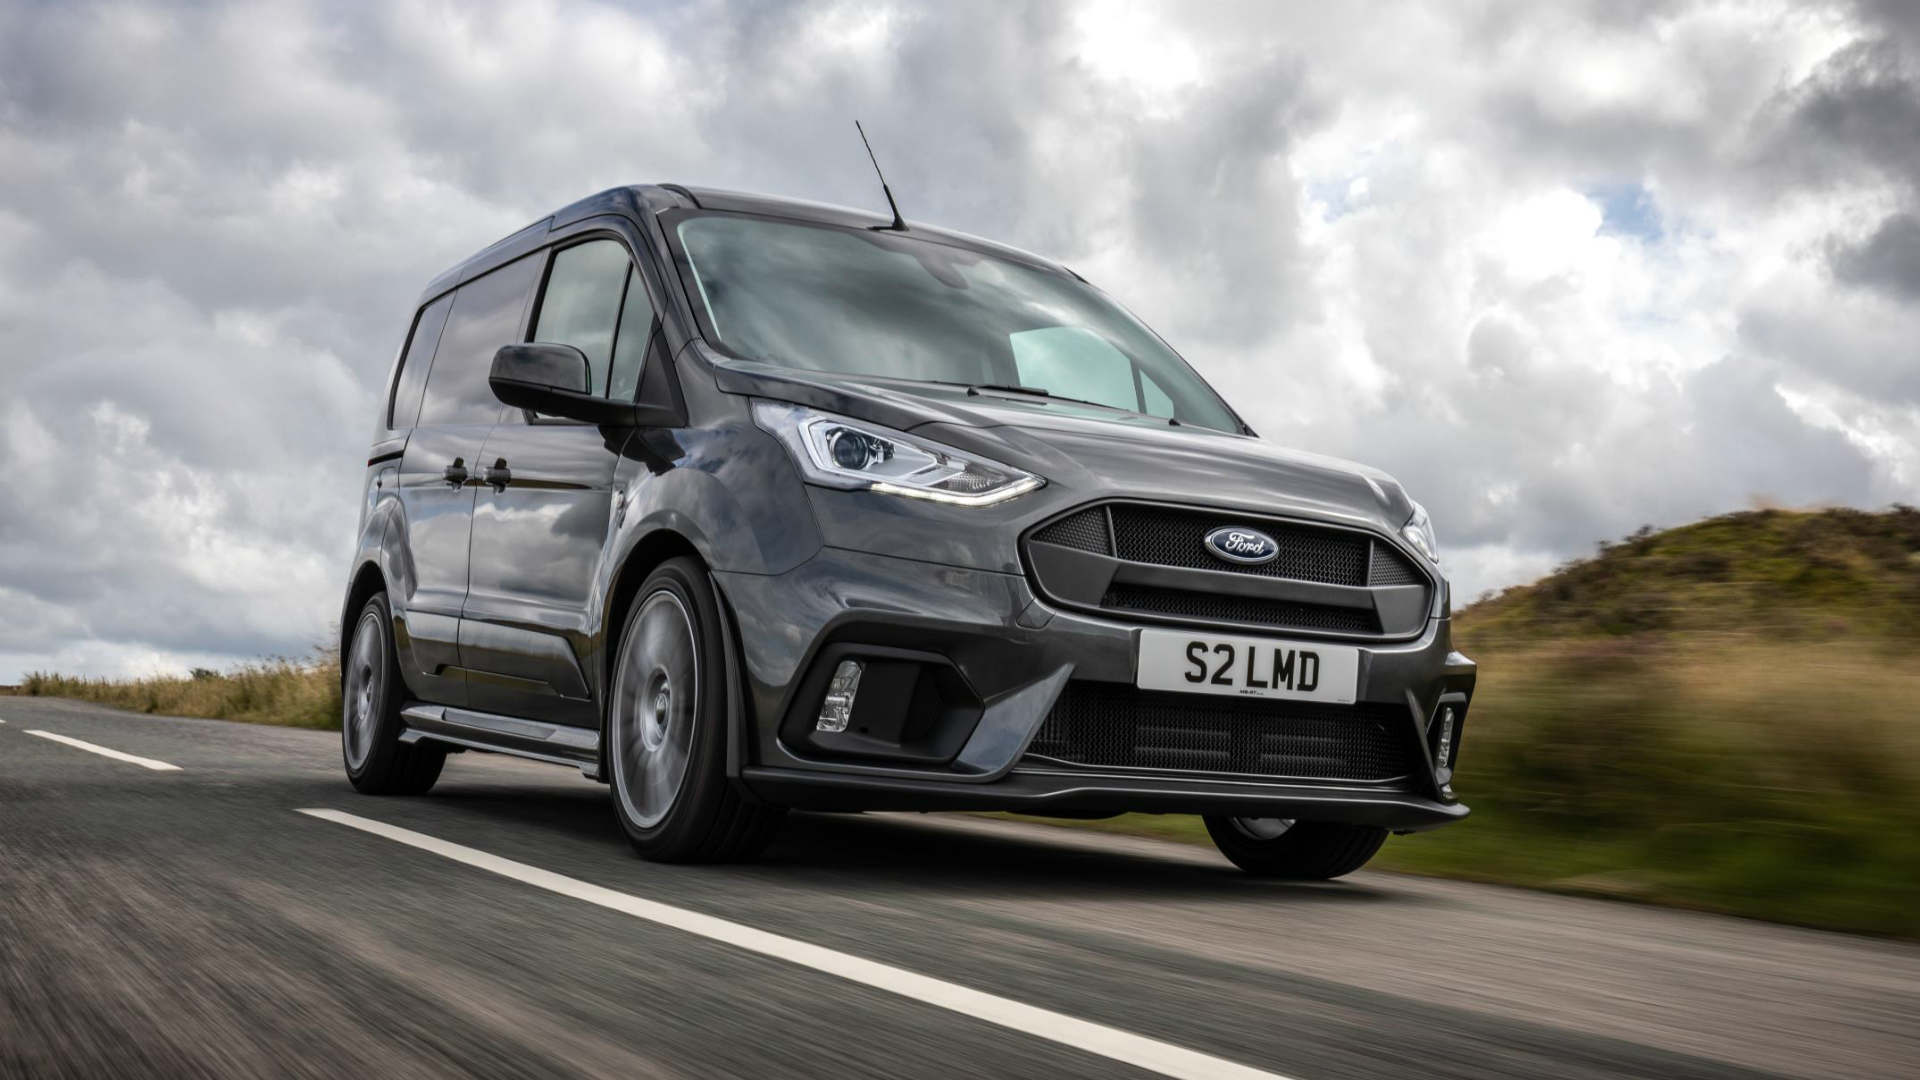 MS-RT Ford Transit Connect review: van meets hot hatch